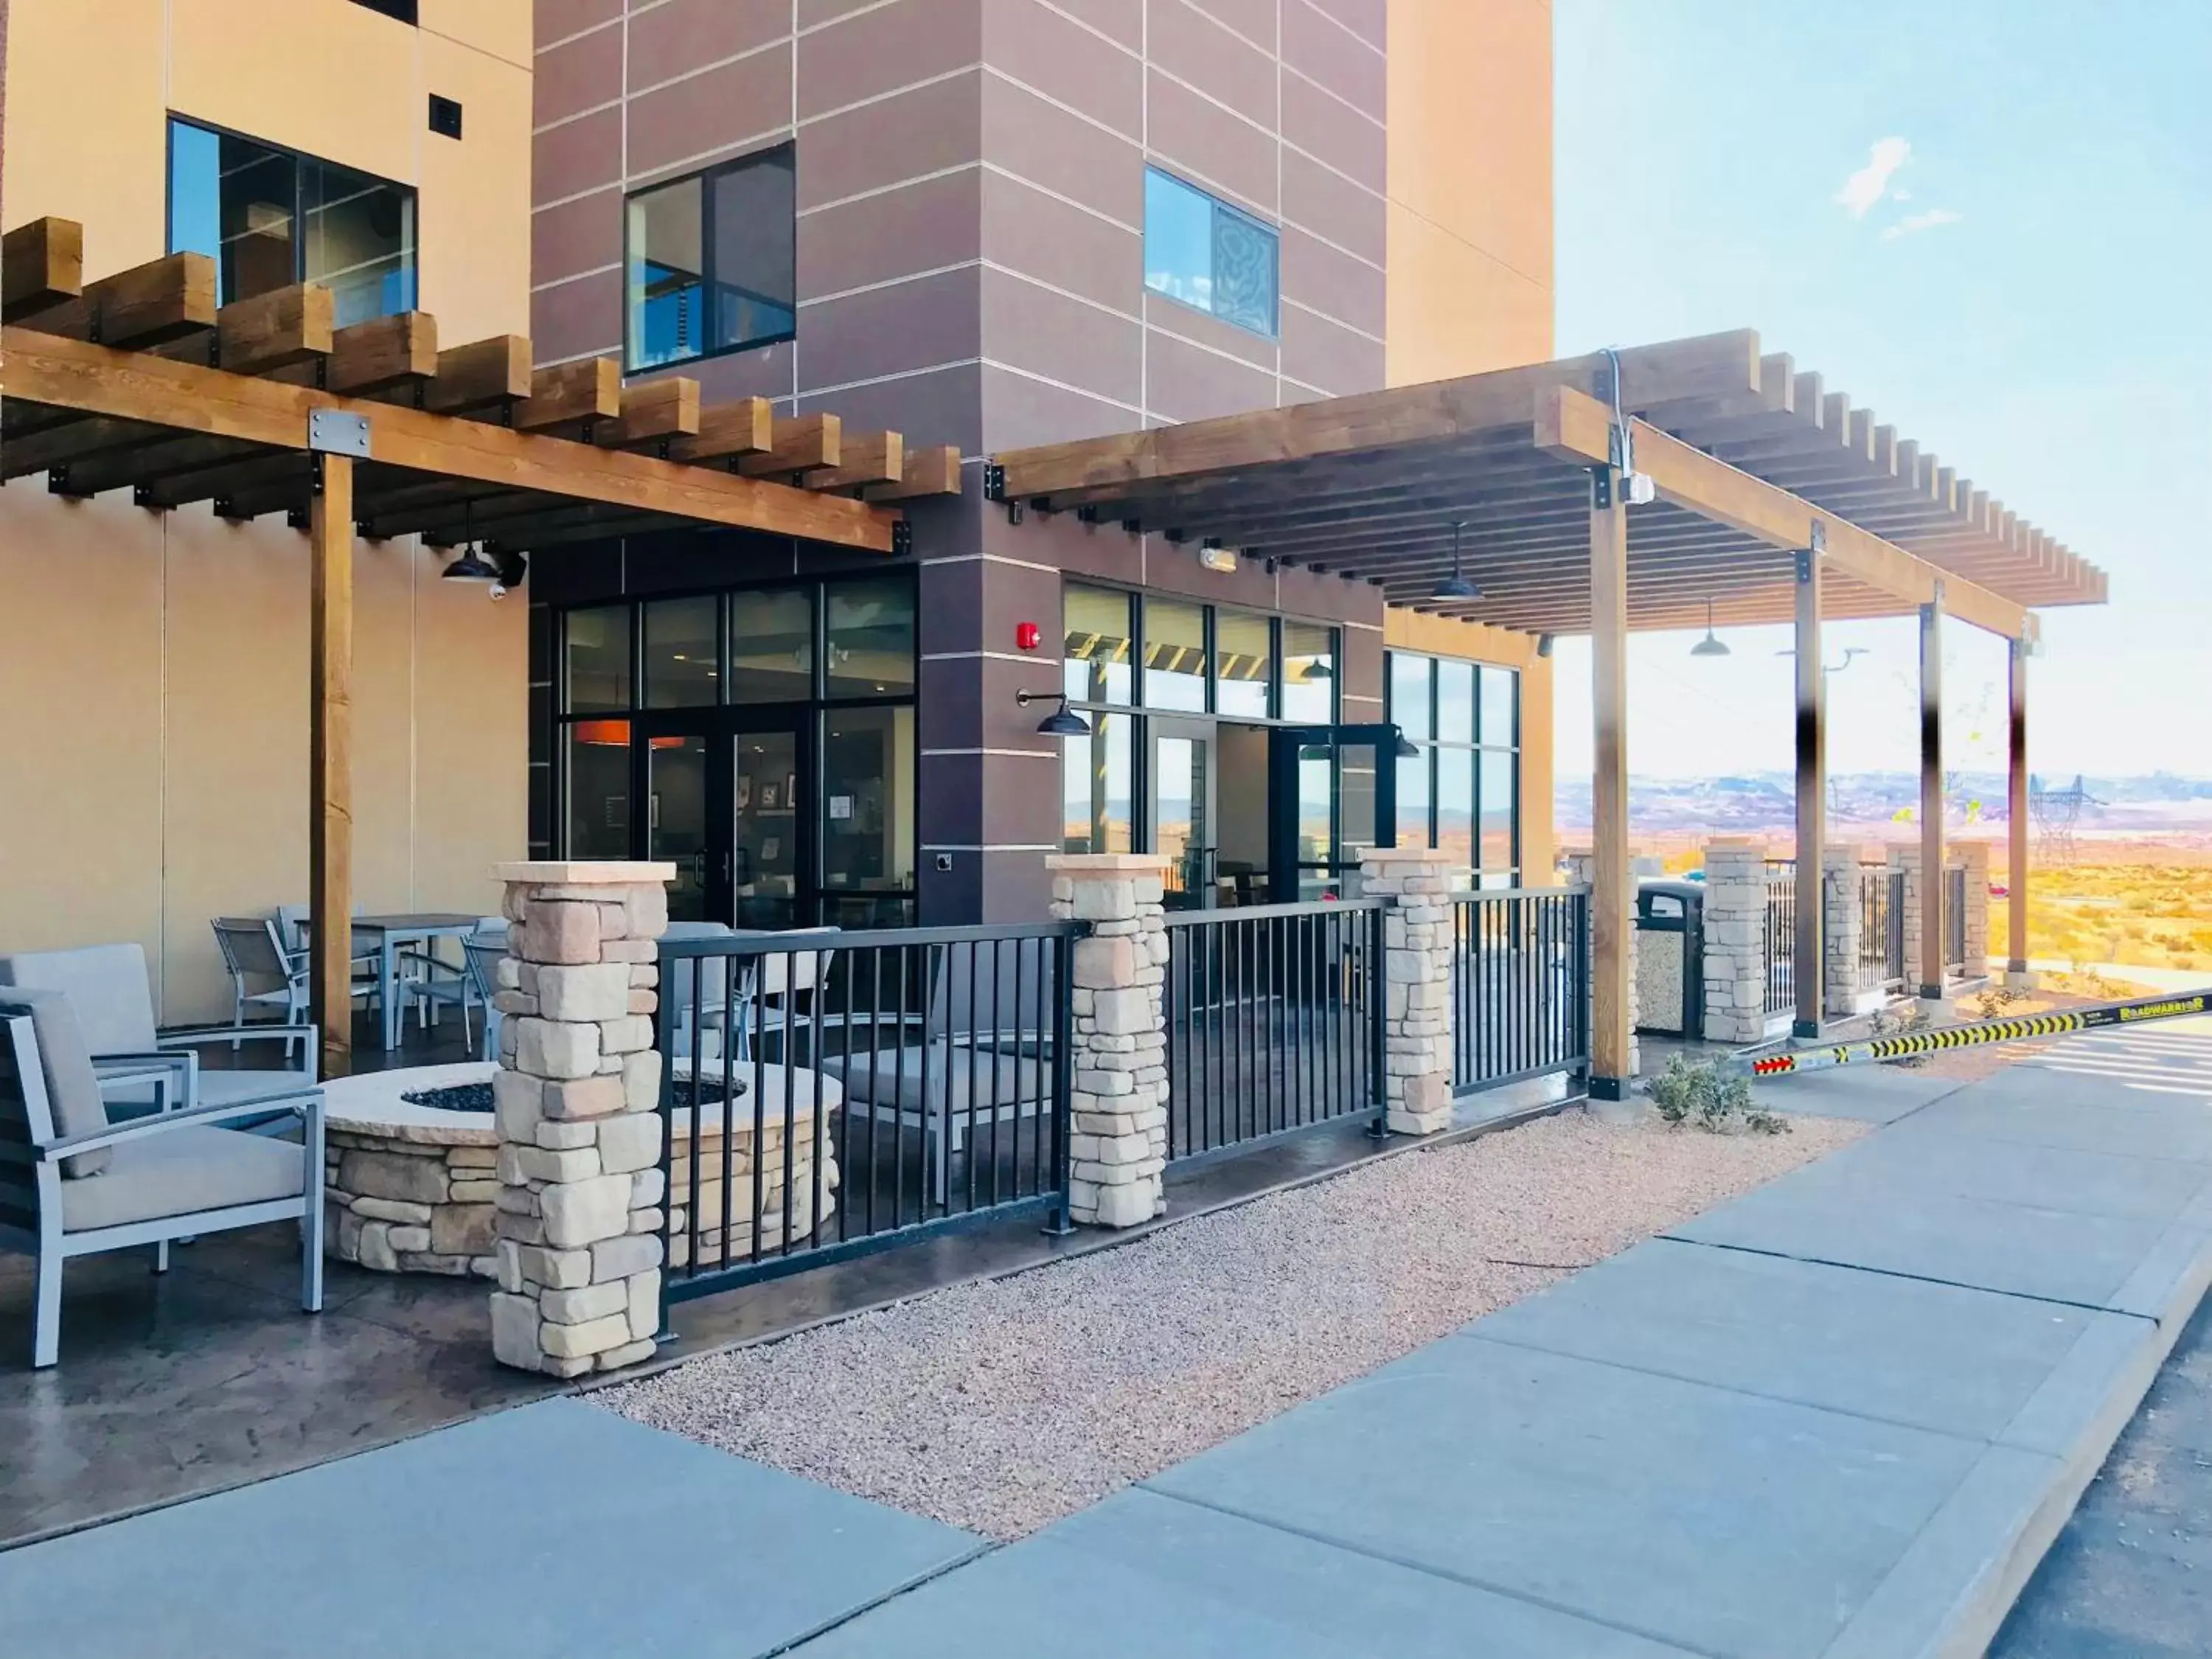 Patio in Country Inn & Suites by Radisson, Page, AZ